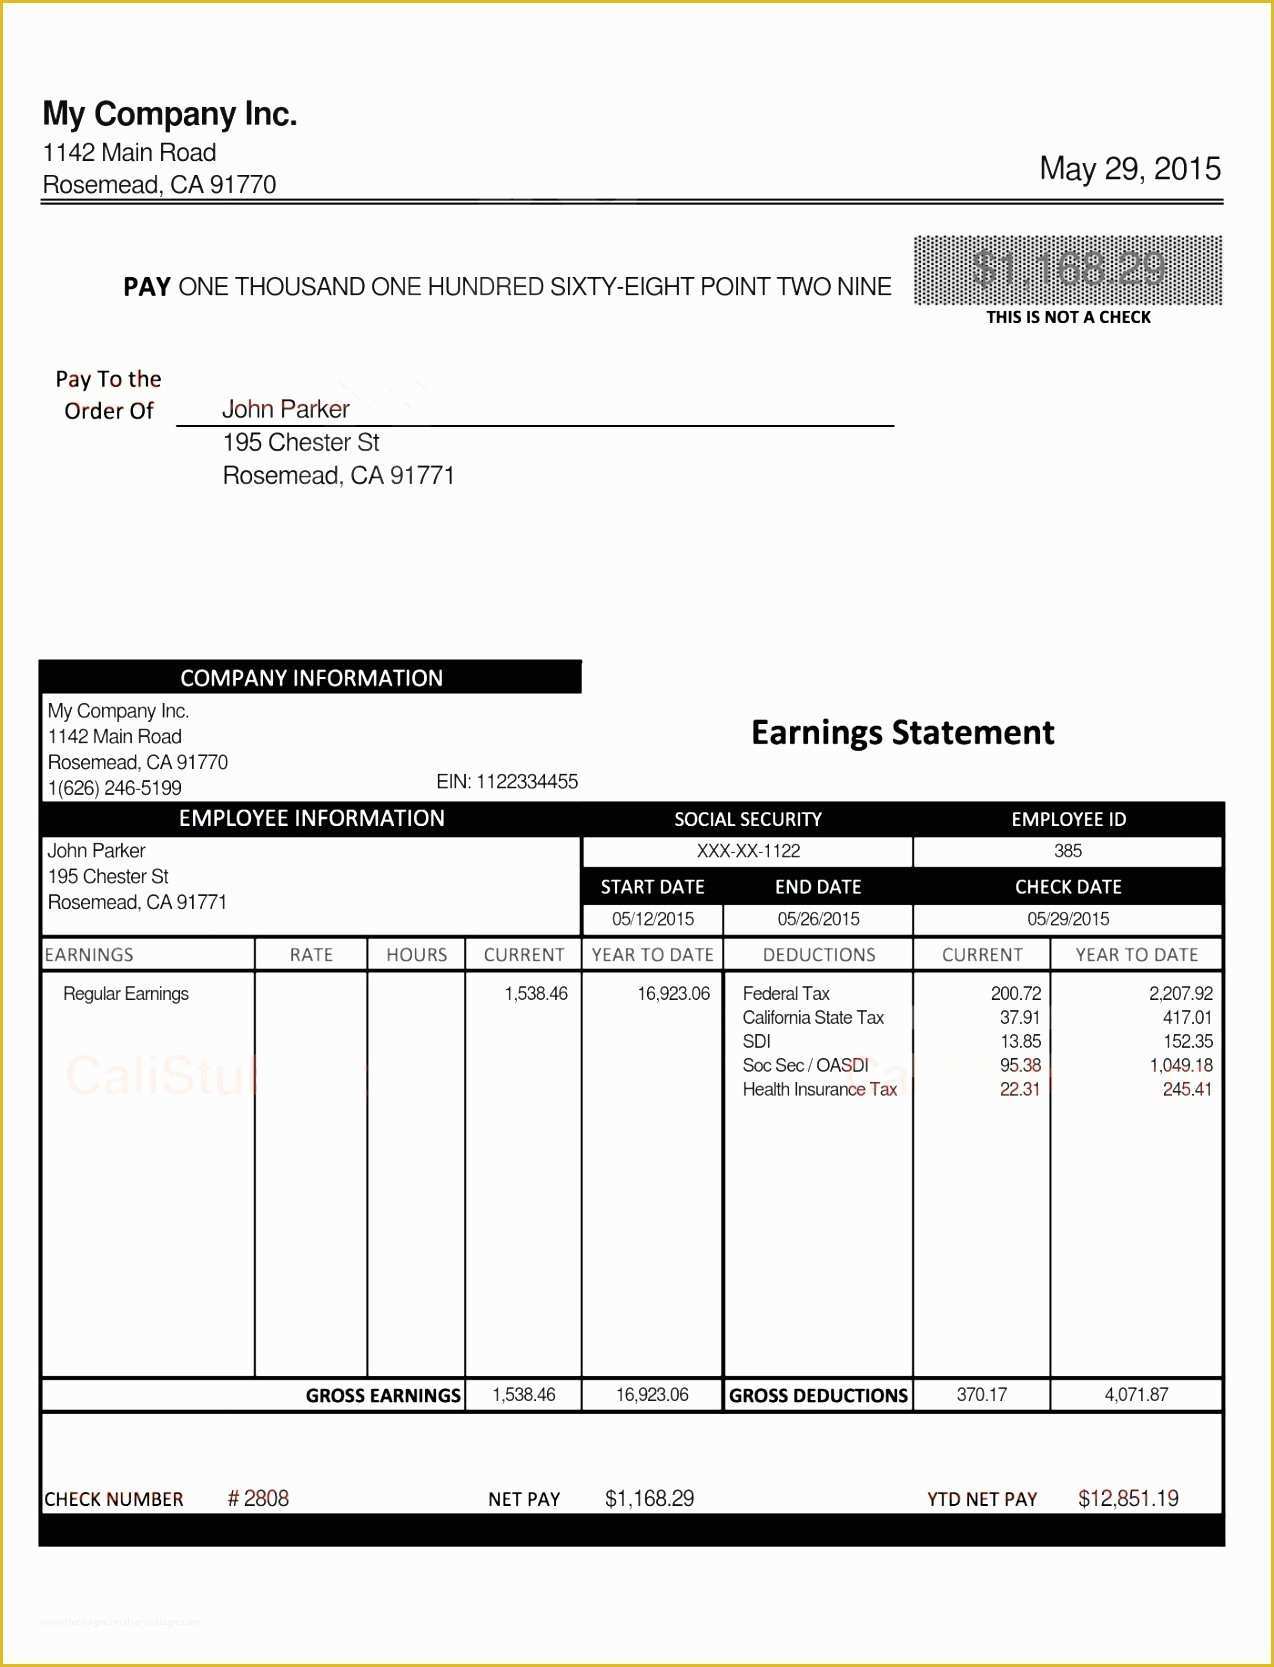 free-check-stub-template-excel-of-free-pay-stub-template-word-document